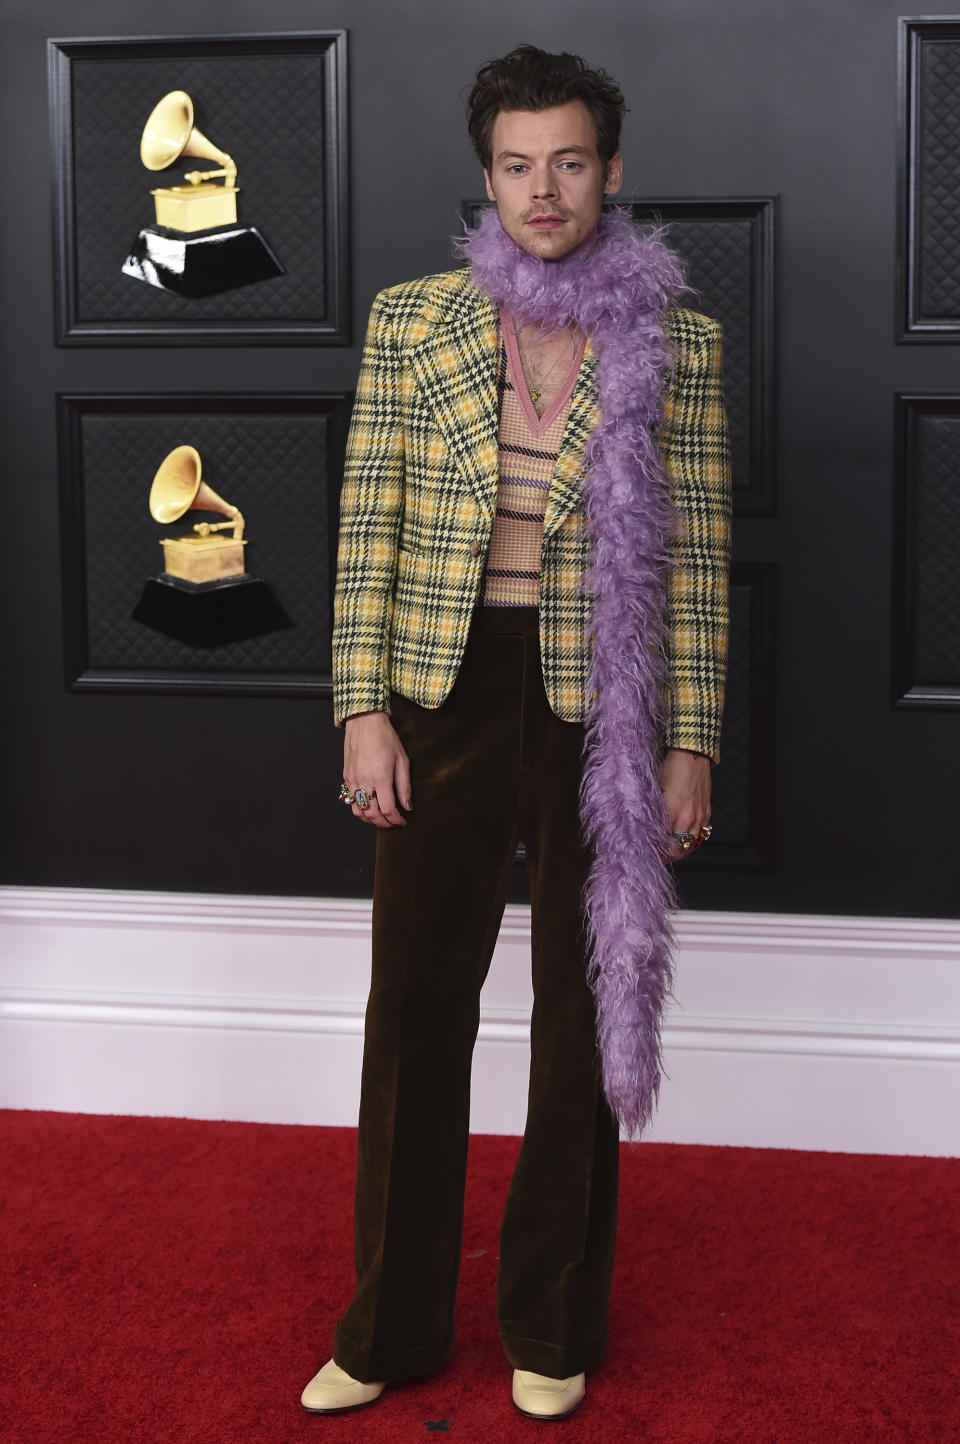 FILE - Harry Styles poses in the press room at the 63rd annual Grammy Awards on March 14, 2021. Styles turns 29 on Feb. 1. (Photo by Jordan Strauss/Invision/AP, File)